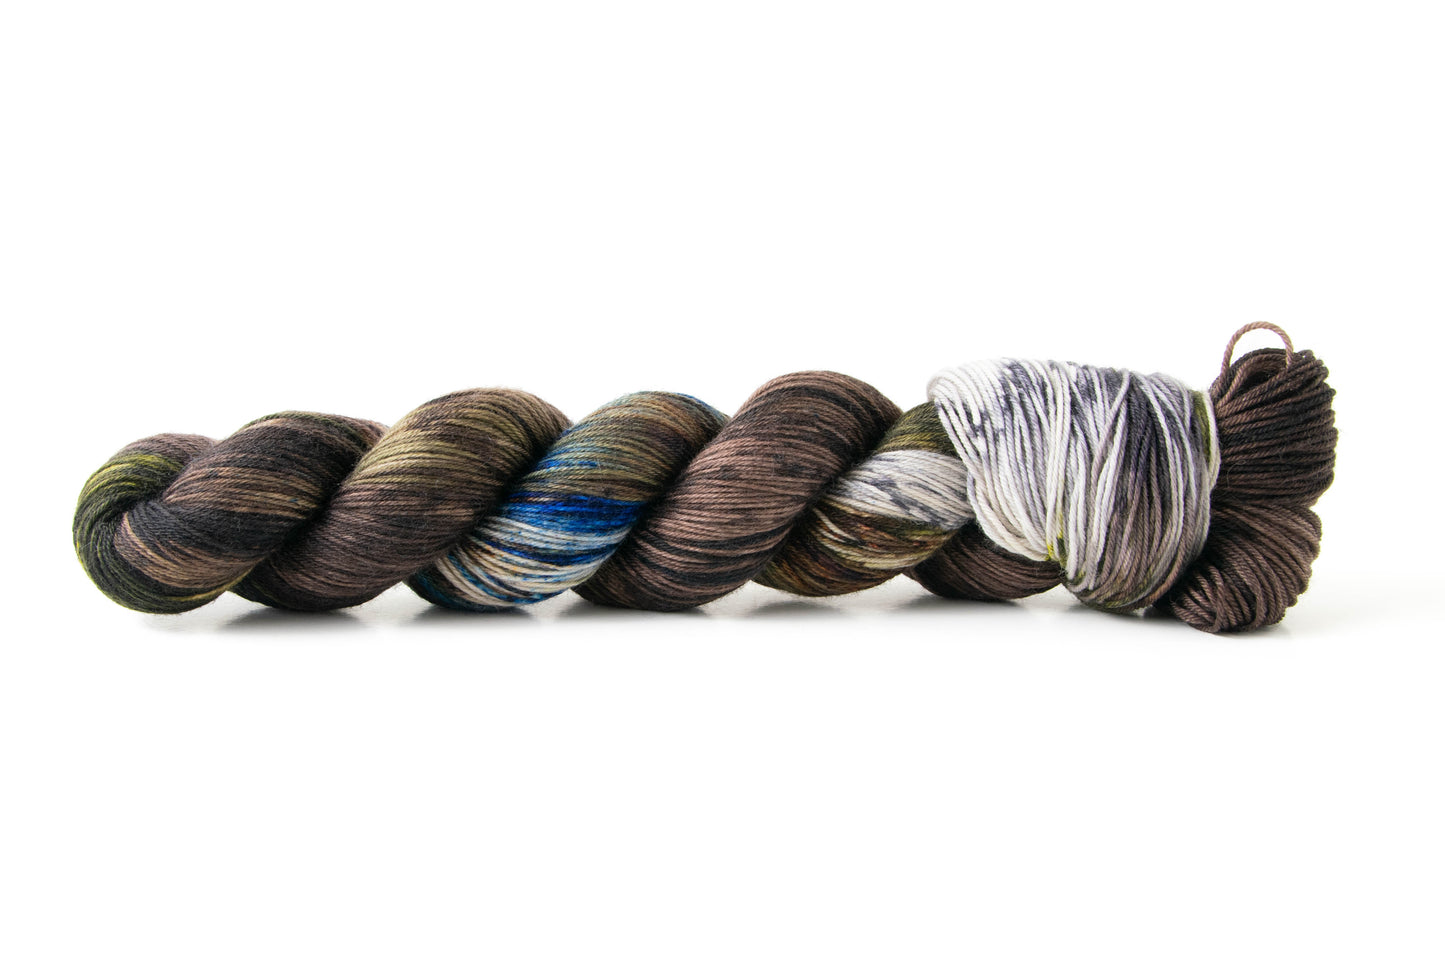 A skein of brown yarn with sections of green, blue, gray, and tan.